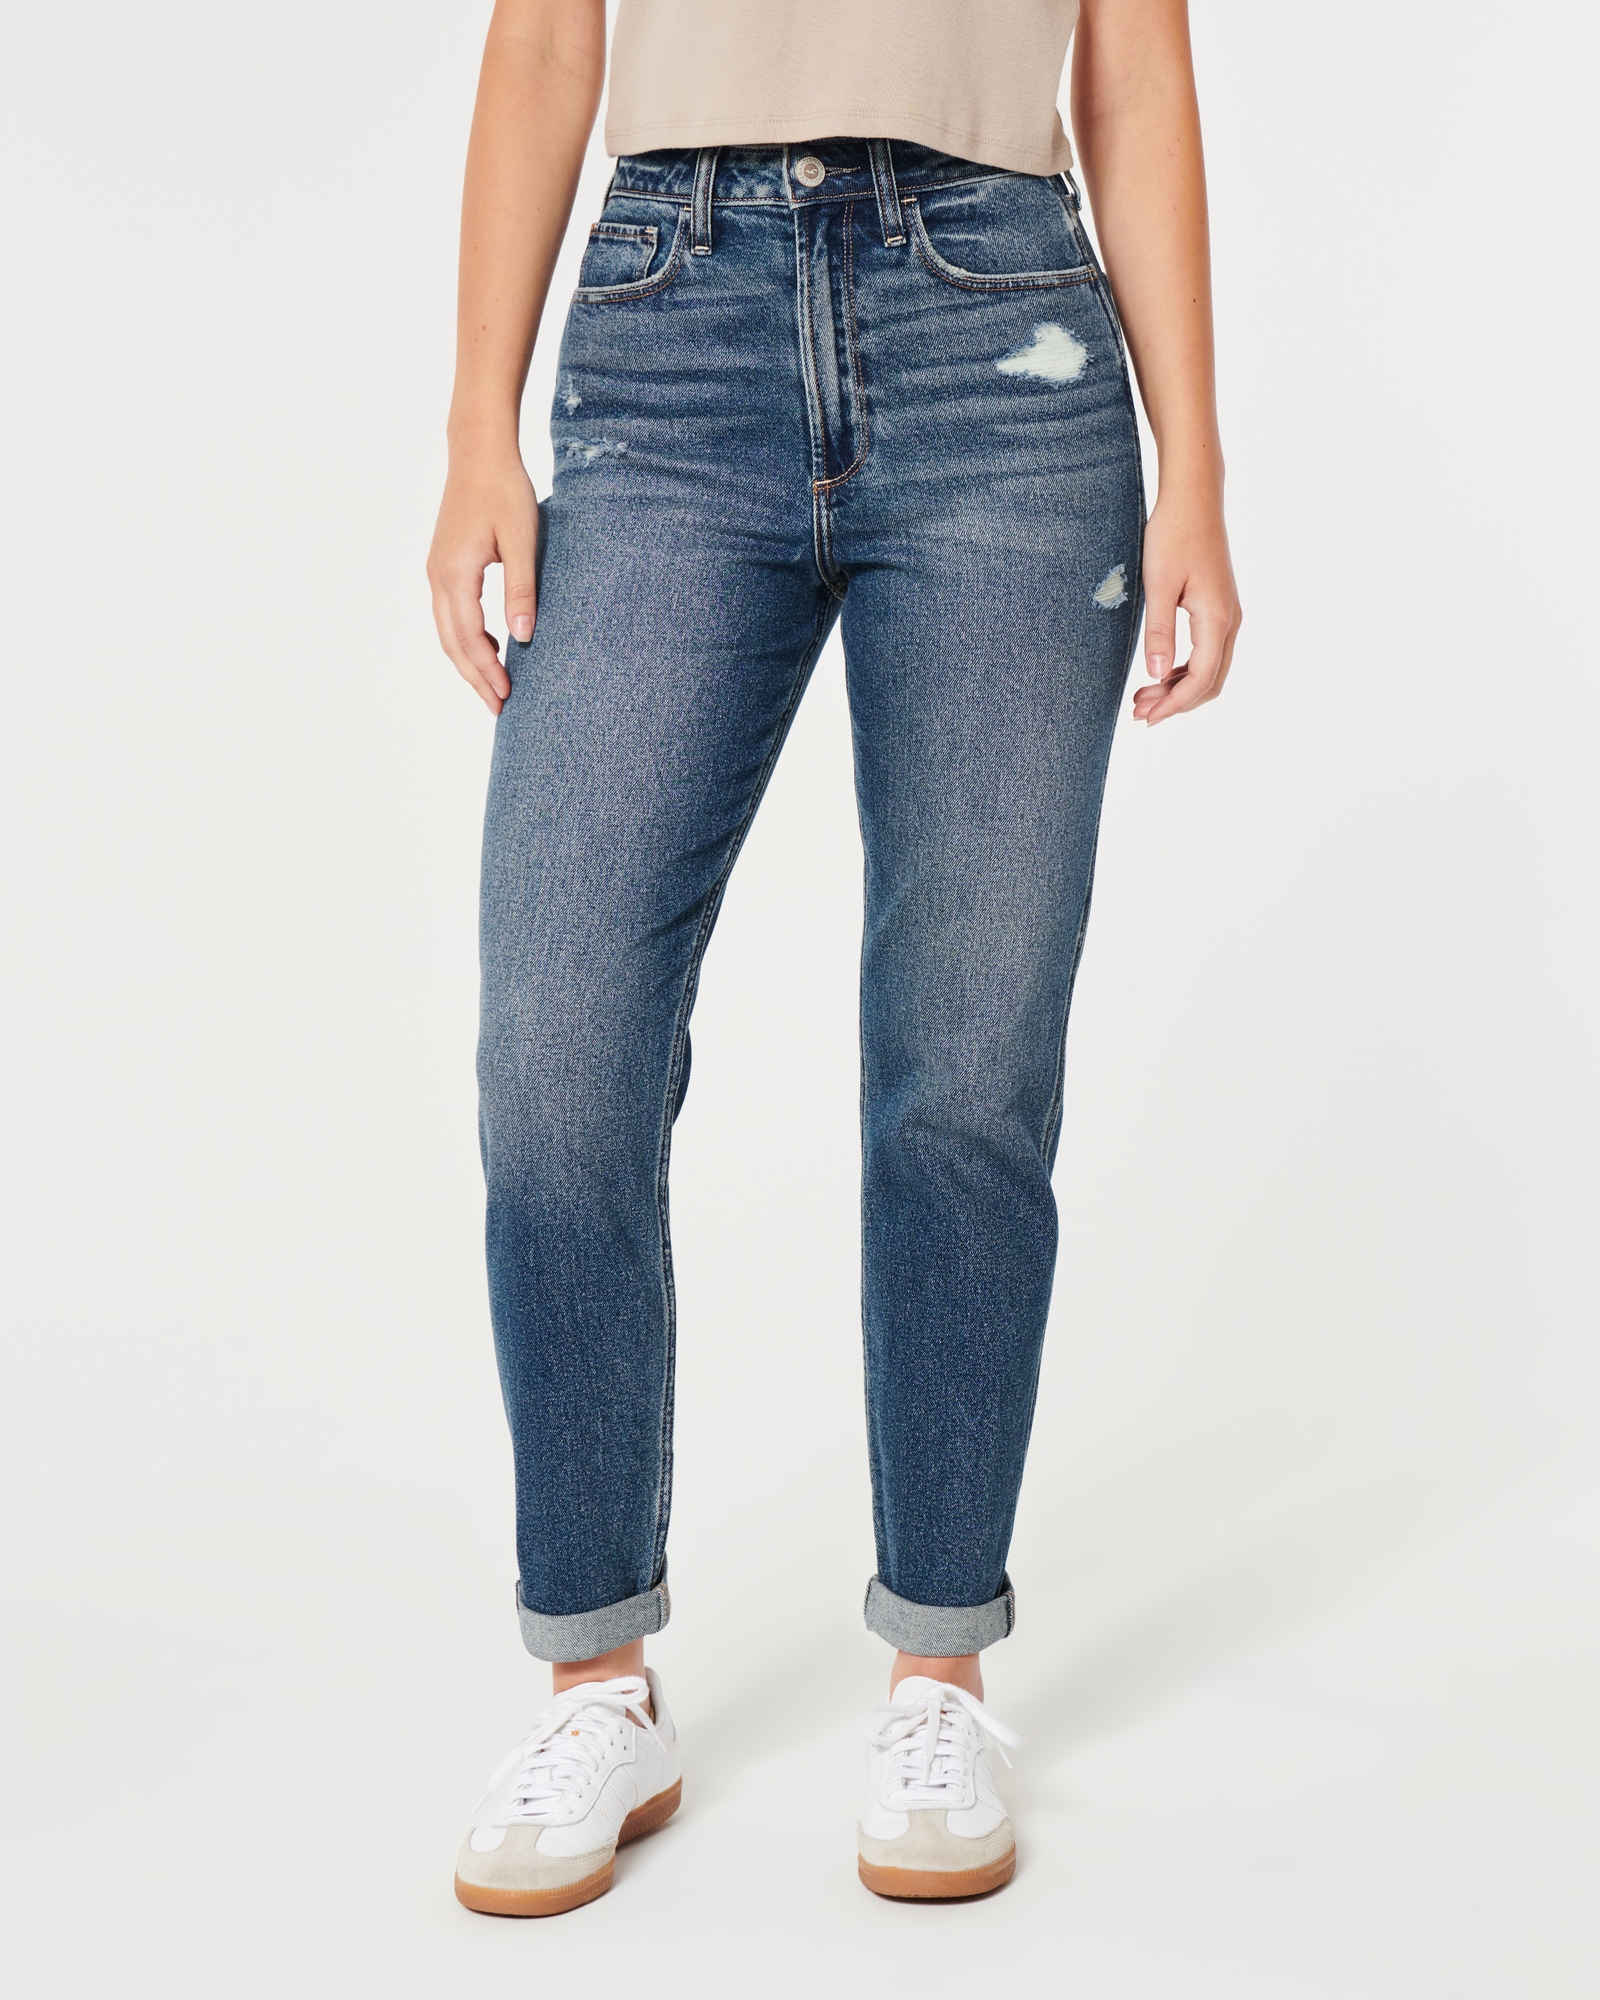 Hollister Ultra High-Rise Mom Jeans Blue Size 26 - $22 - From scout